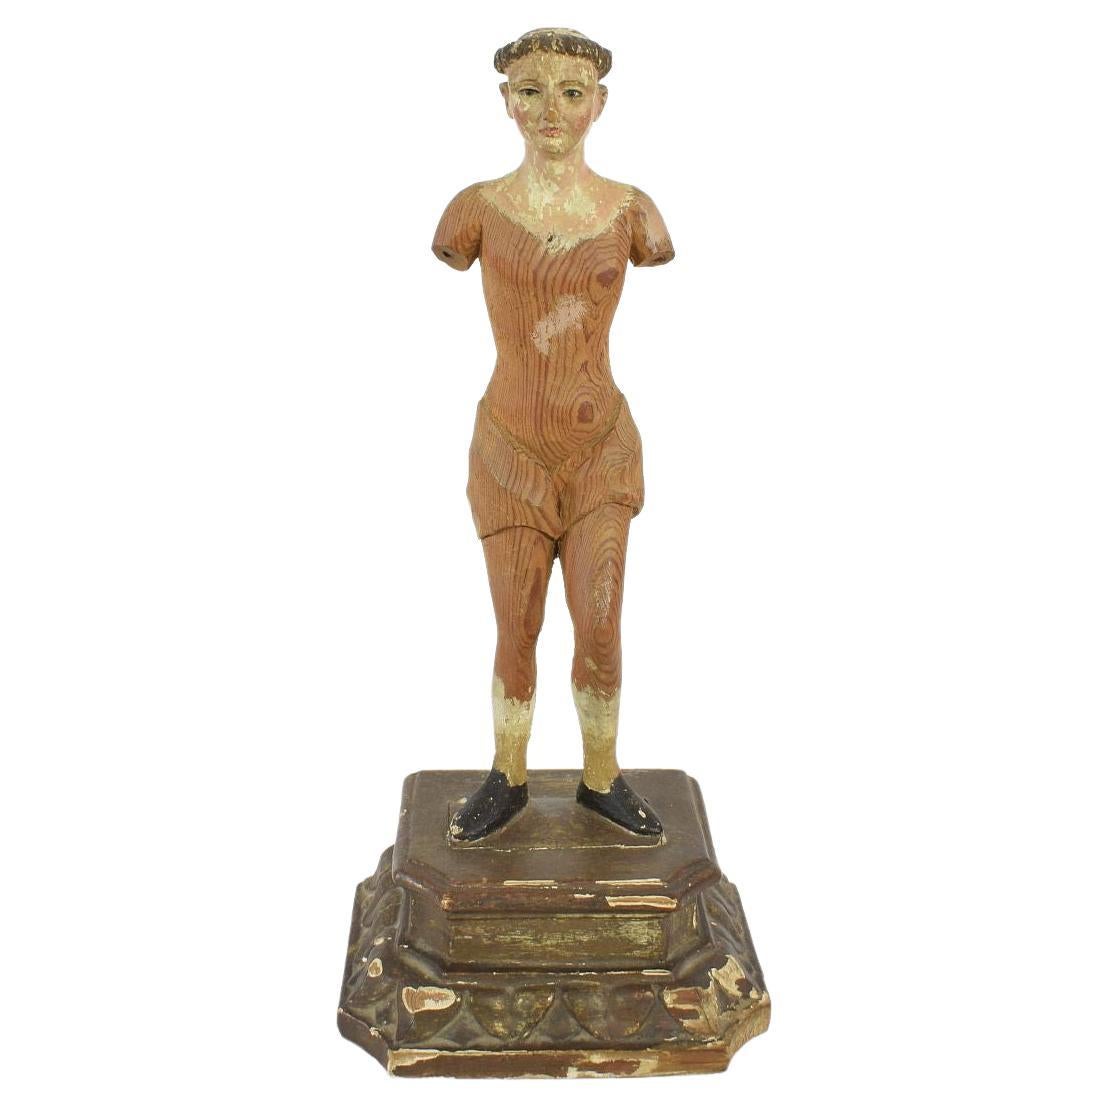 Italian 19th Century Carved Wooden Saint Figure For Sale